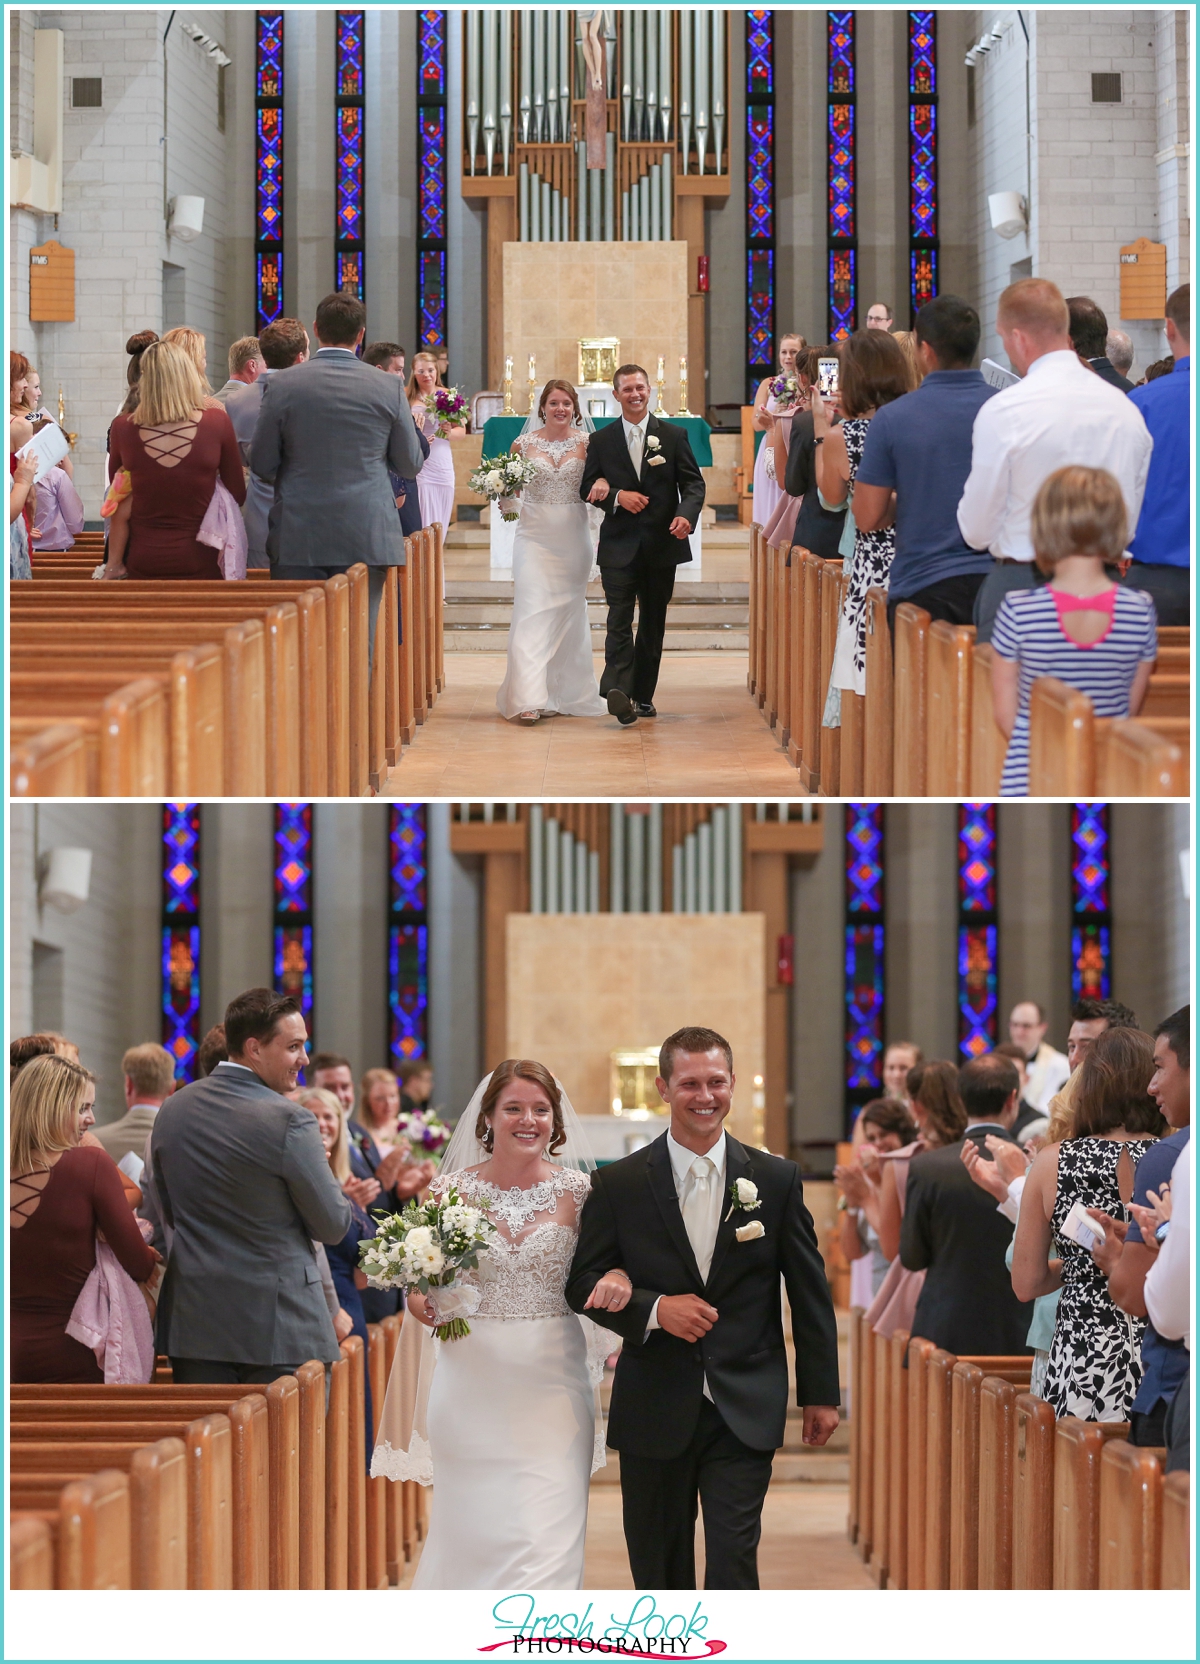 walking down the aisle together